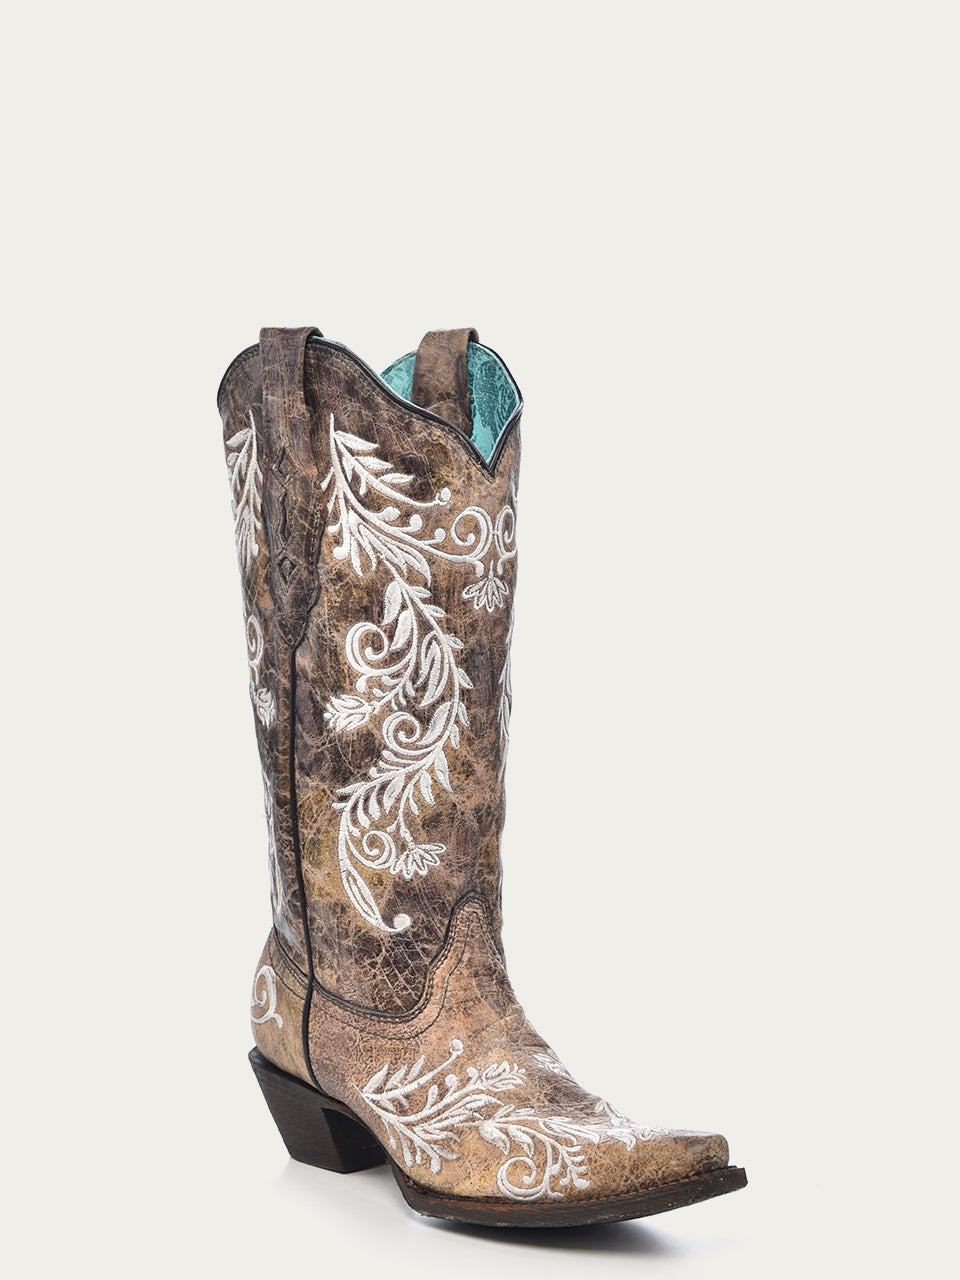 A3753 - WOMEN'S GLOW IN THE DARK WHITE FEATHERED FLORAL EMBROIDERY BROWN SNIP TOE COWBOY BOOT